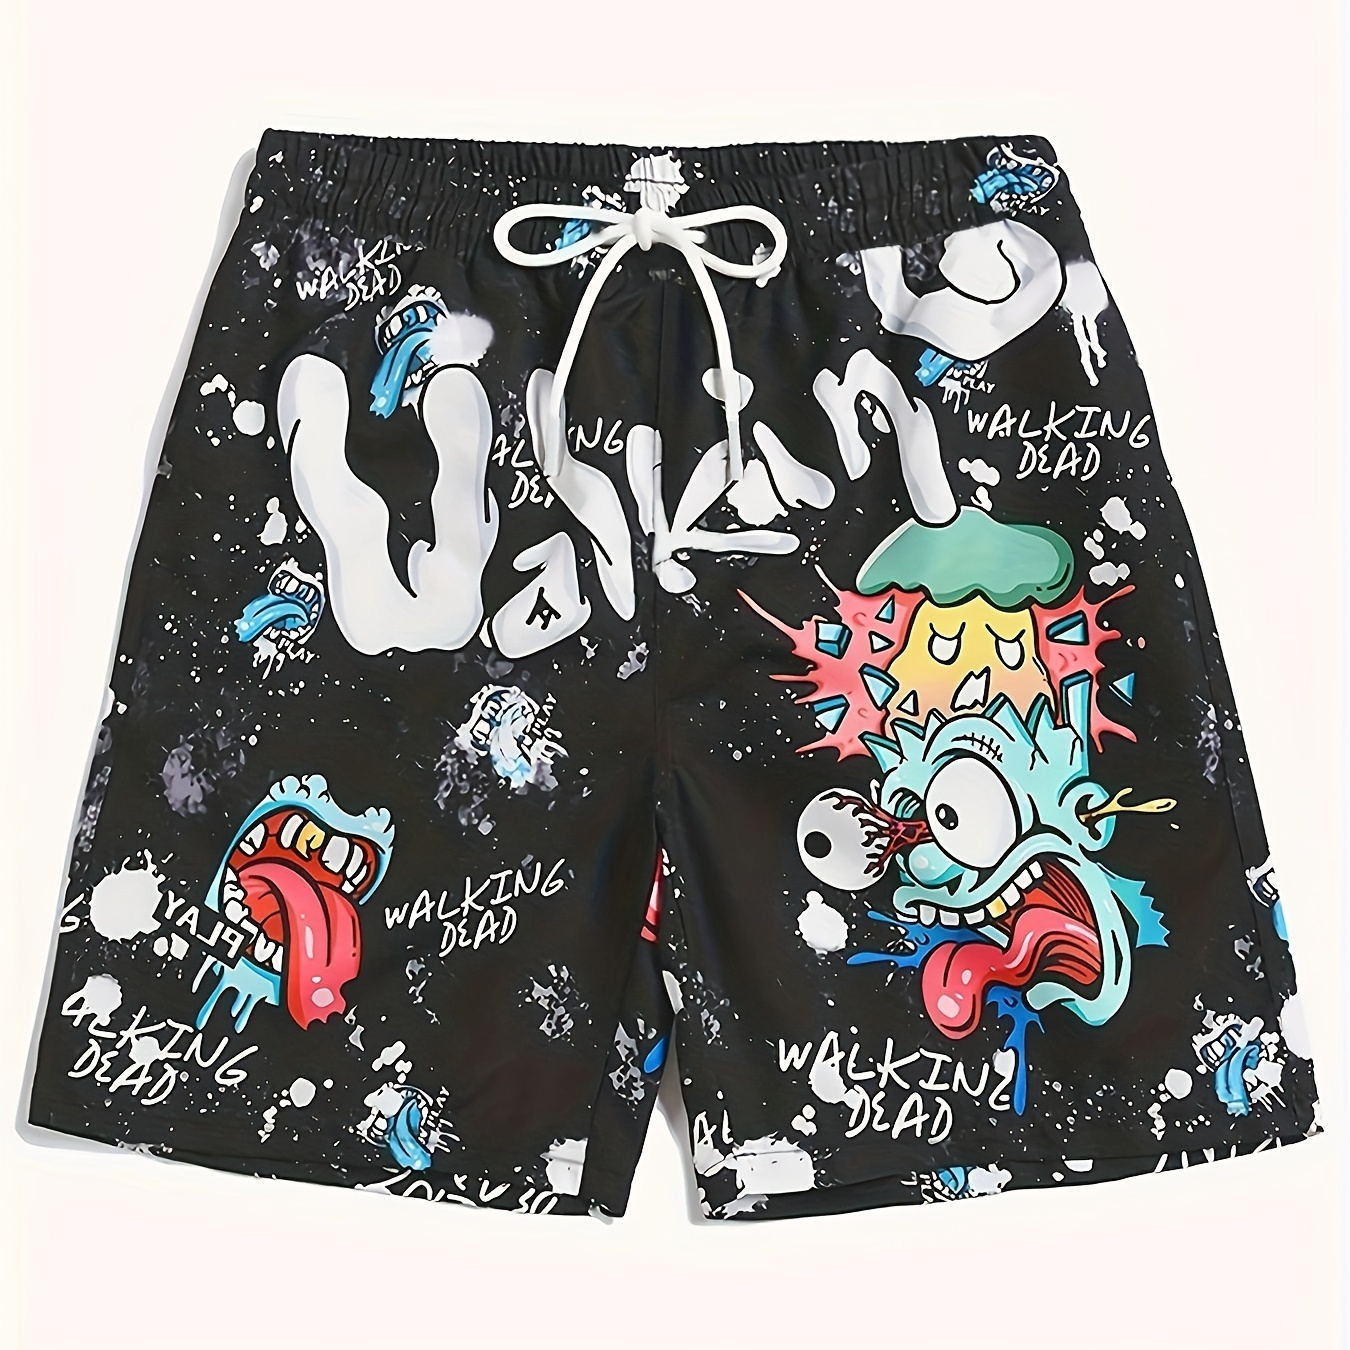 

Men's Cartoon Style Zombie Pattern And Letter Print Board Shorts, Chic And Stylish Shorts With Drawstring And Pockets, Versatile For Summer Leisurewear And Beach Holiday